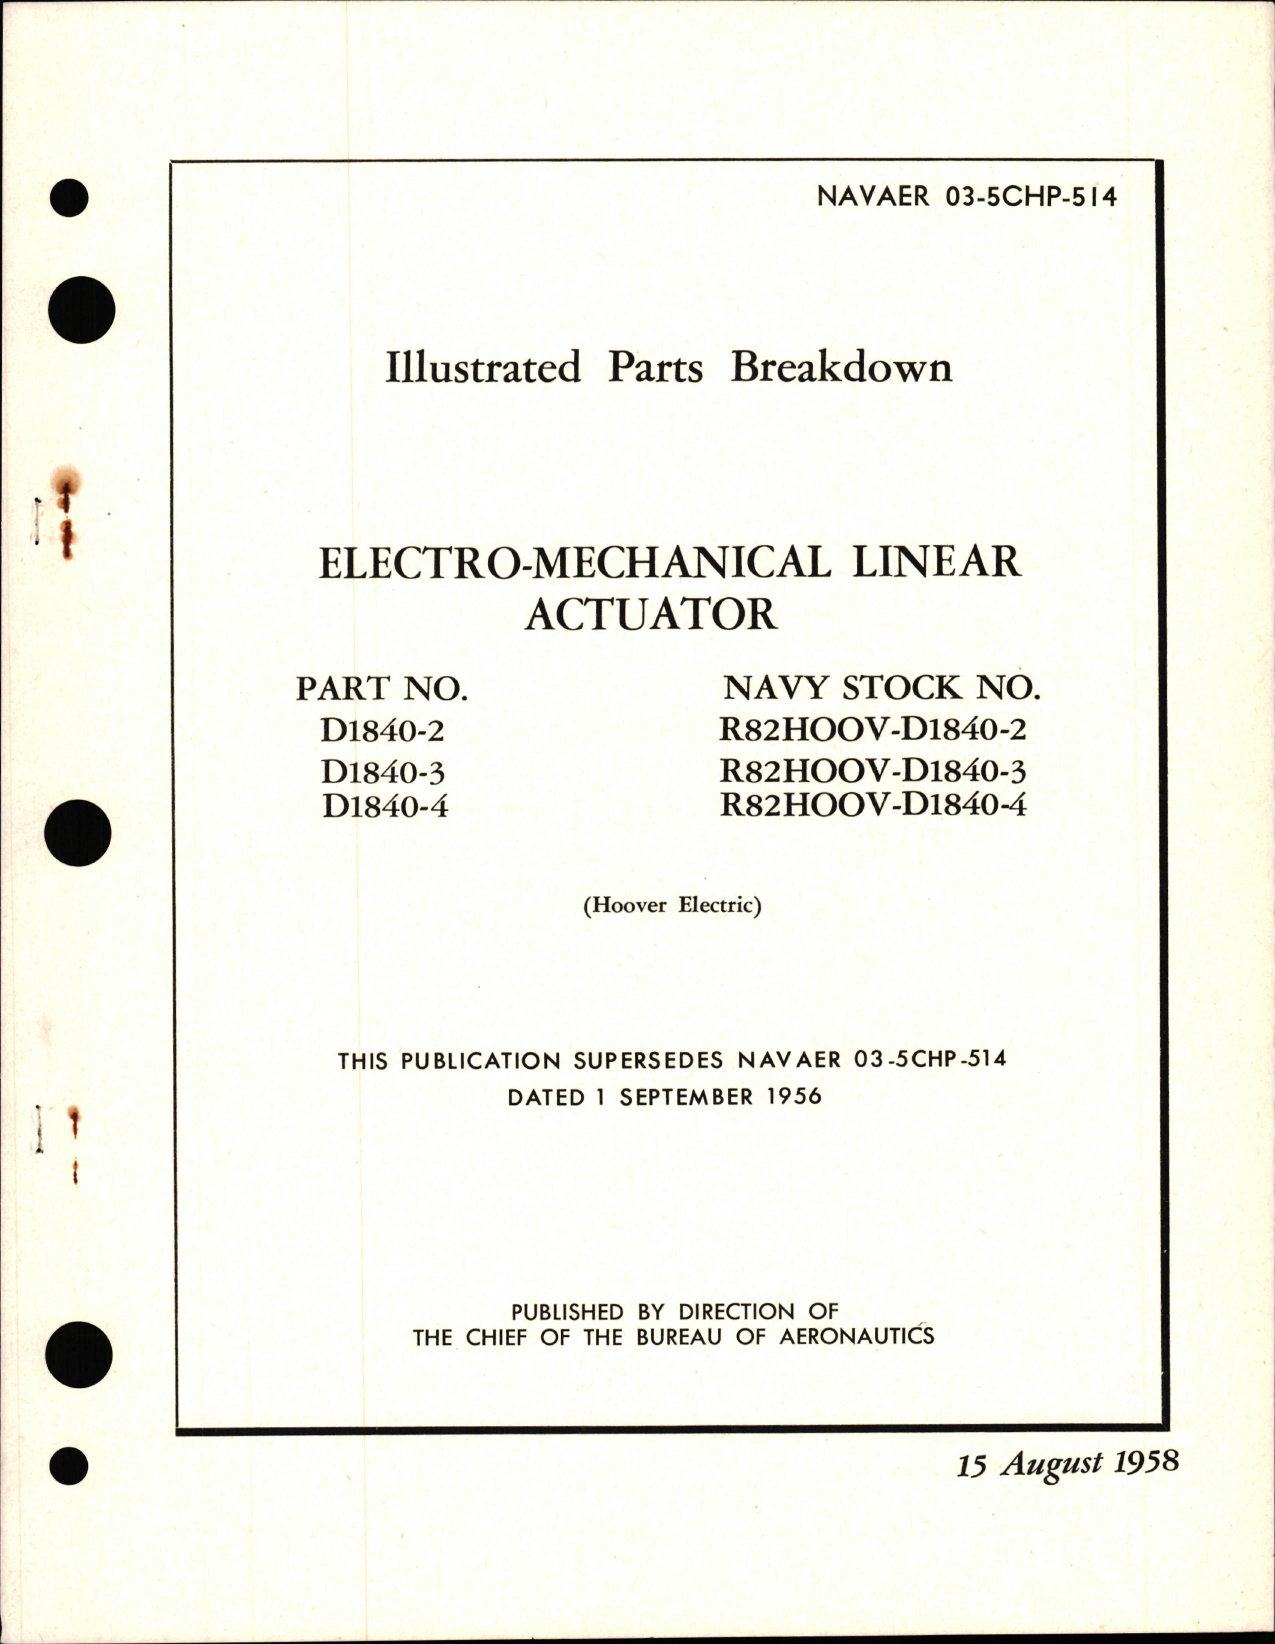 Sample page 1 from AirCorps Library document: Illustrated Parts Breakdown for Electro-Mechanical Linear Actuator Parts D1840-2, D1840-3, and D1840-4 (Hoover) 